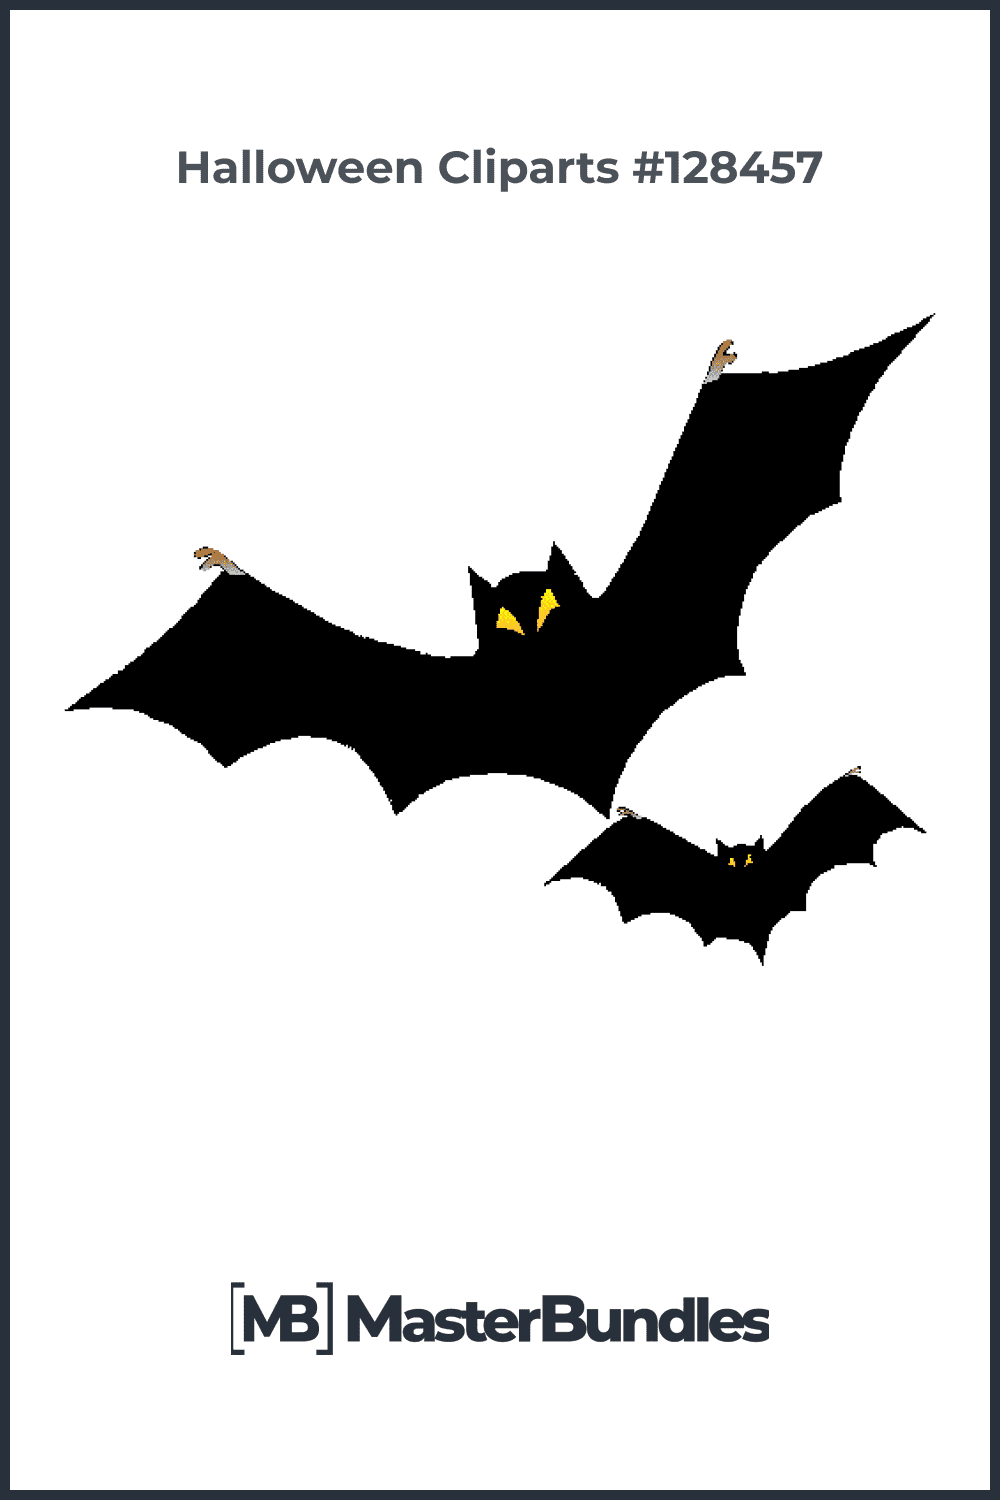 Bats as the main attribute of Halloween night.